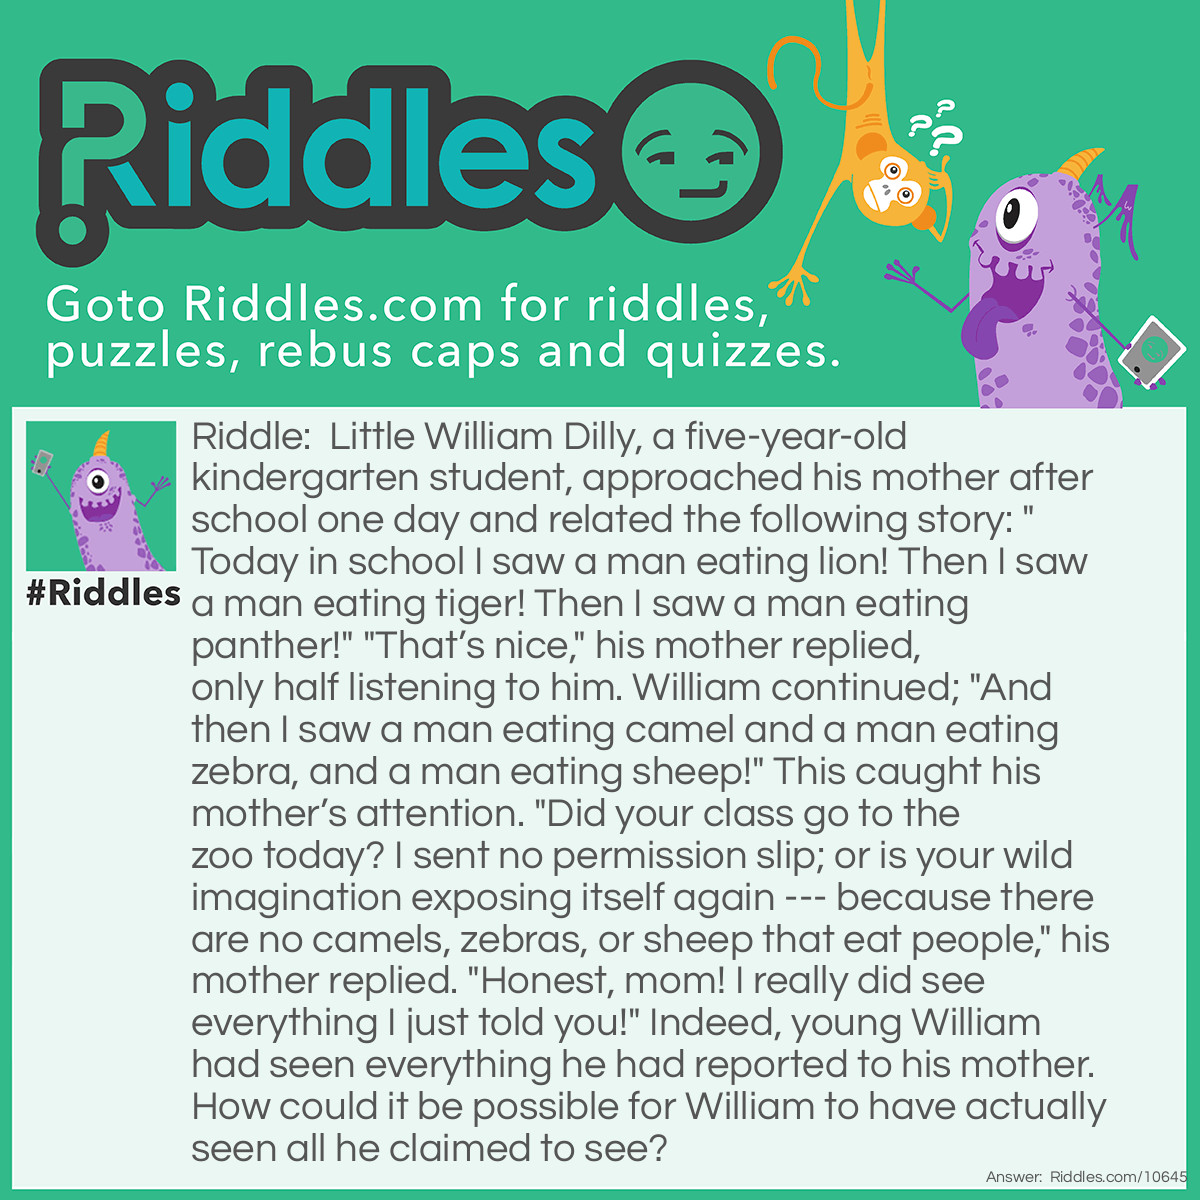 Riddle: Little William Dilly, a five-year-old kindergarten student, approached his mother after school one day and related the following story: "Today in school I saw a man eating lion! Then I saw a man eating tiger! Then I saw a man eating panther!" "That’s nice," his mother replied, only half listening to him. William continued; "And then I saw a man eating camel and a man eating zebra, and a man eating sheep!" This caught his mother’s attention. "Did your class go to the zoo today? I sent no permission slip; or is your wild imagination exposing itself again --- because there are no camels, zebras, or sheep that eat people," his mother replied. "Honest, mom! I really did see everything I just told you!" Indeed, young William had seen everything he had reported to his mother. How could it be possible for William to have actually seen all he claimed to see? Answer: Little William’s kindergarten teacher was a man who enjoyed having fun with his students. At lunchtime that day, he took out a box of animal crackers, and holding up one animal at a time he would announce to the class, “You are now seeing a man eating lion, or a man eating sheep,” etc., and then proceed to eat each cracker, much to the children’s amusement. Little William was just reporting what he had seen his teacher doing and saying that day.